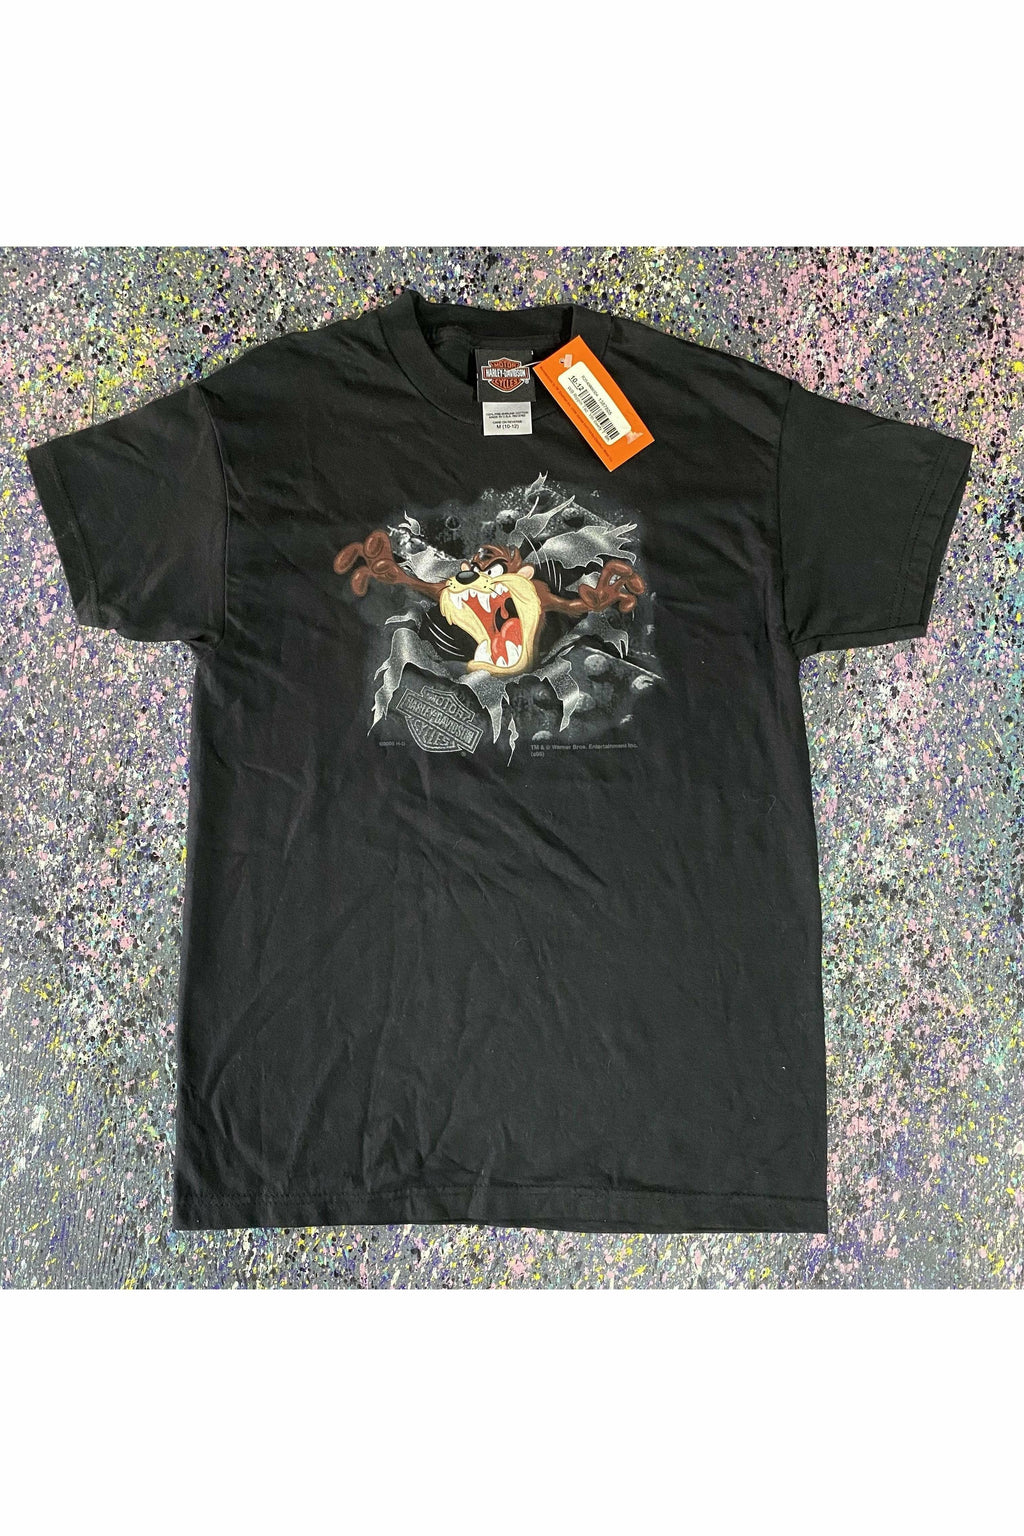 Harley-Davidson 2005 Looney Tunes Youth Tee New w/ Tags- M (10-12)